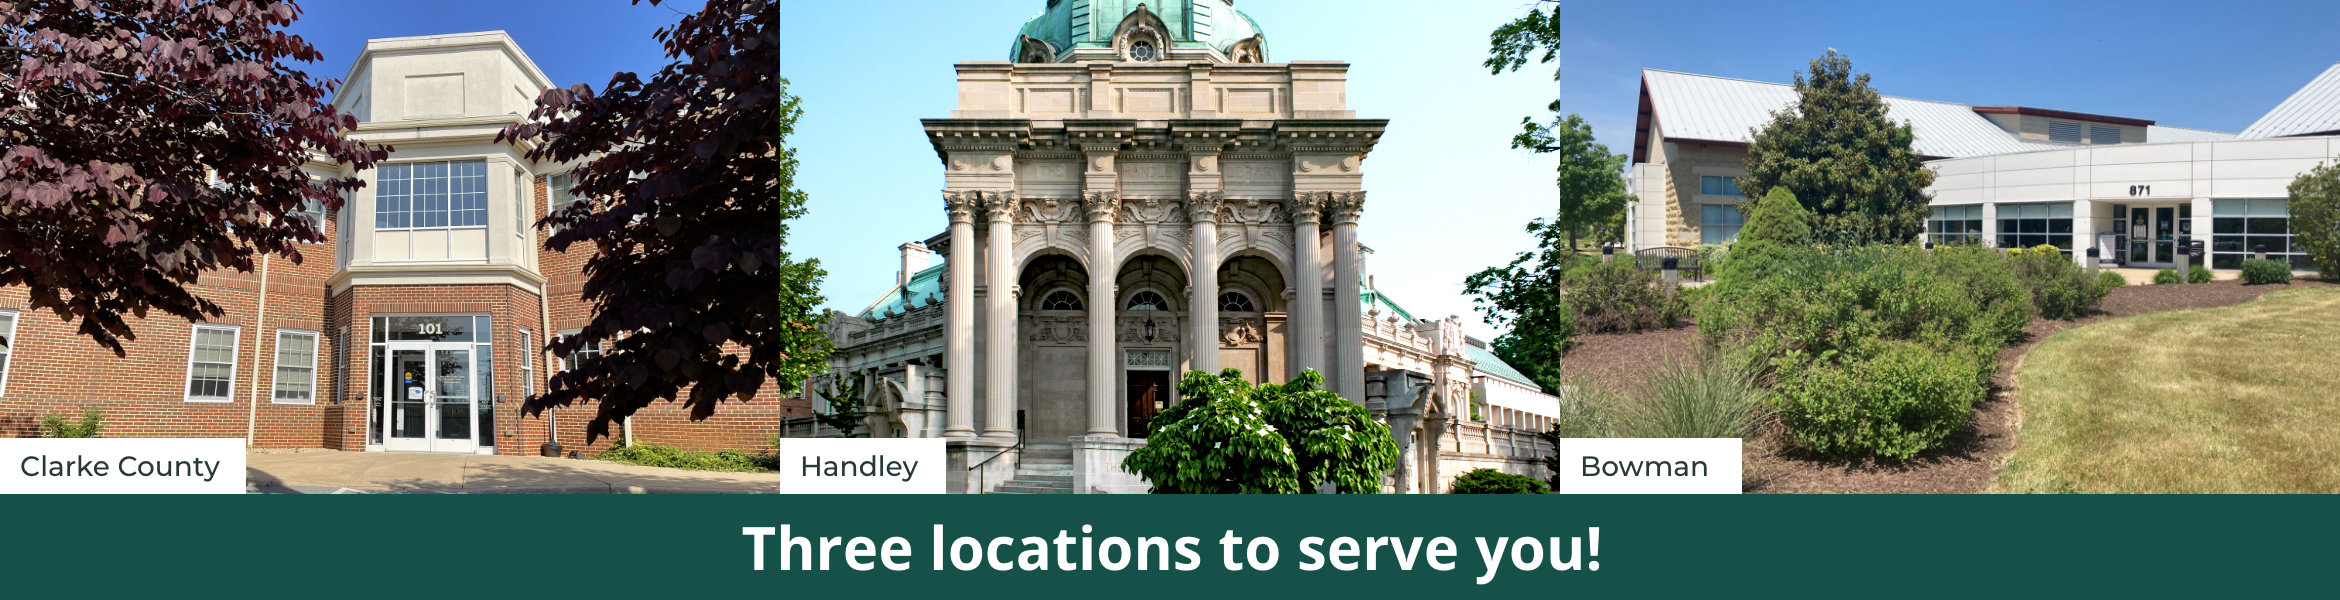 Location slide that reads "Three locations to serve you!" with images of the three branch location buildings